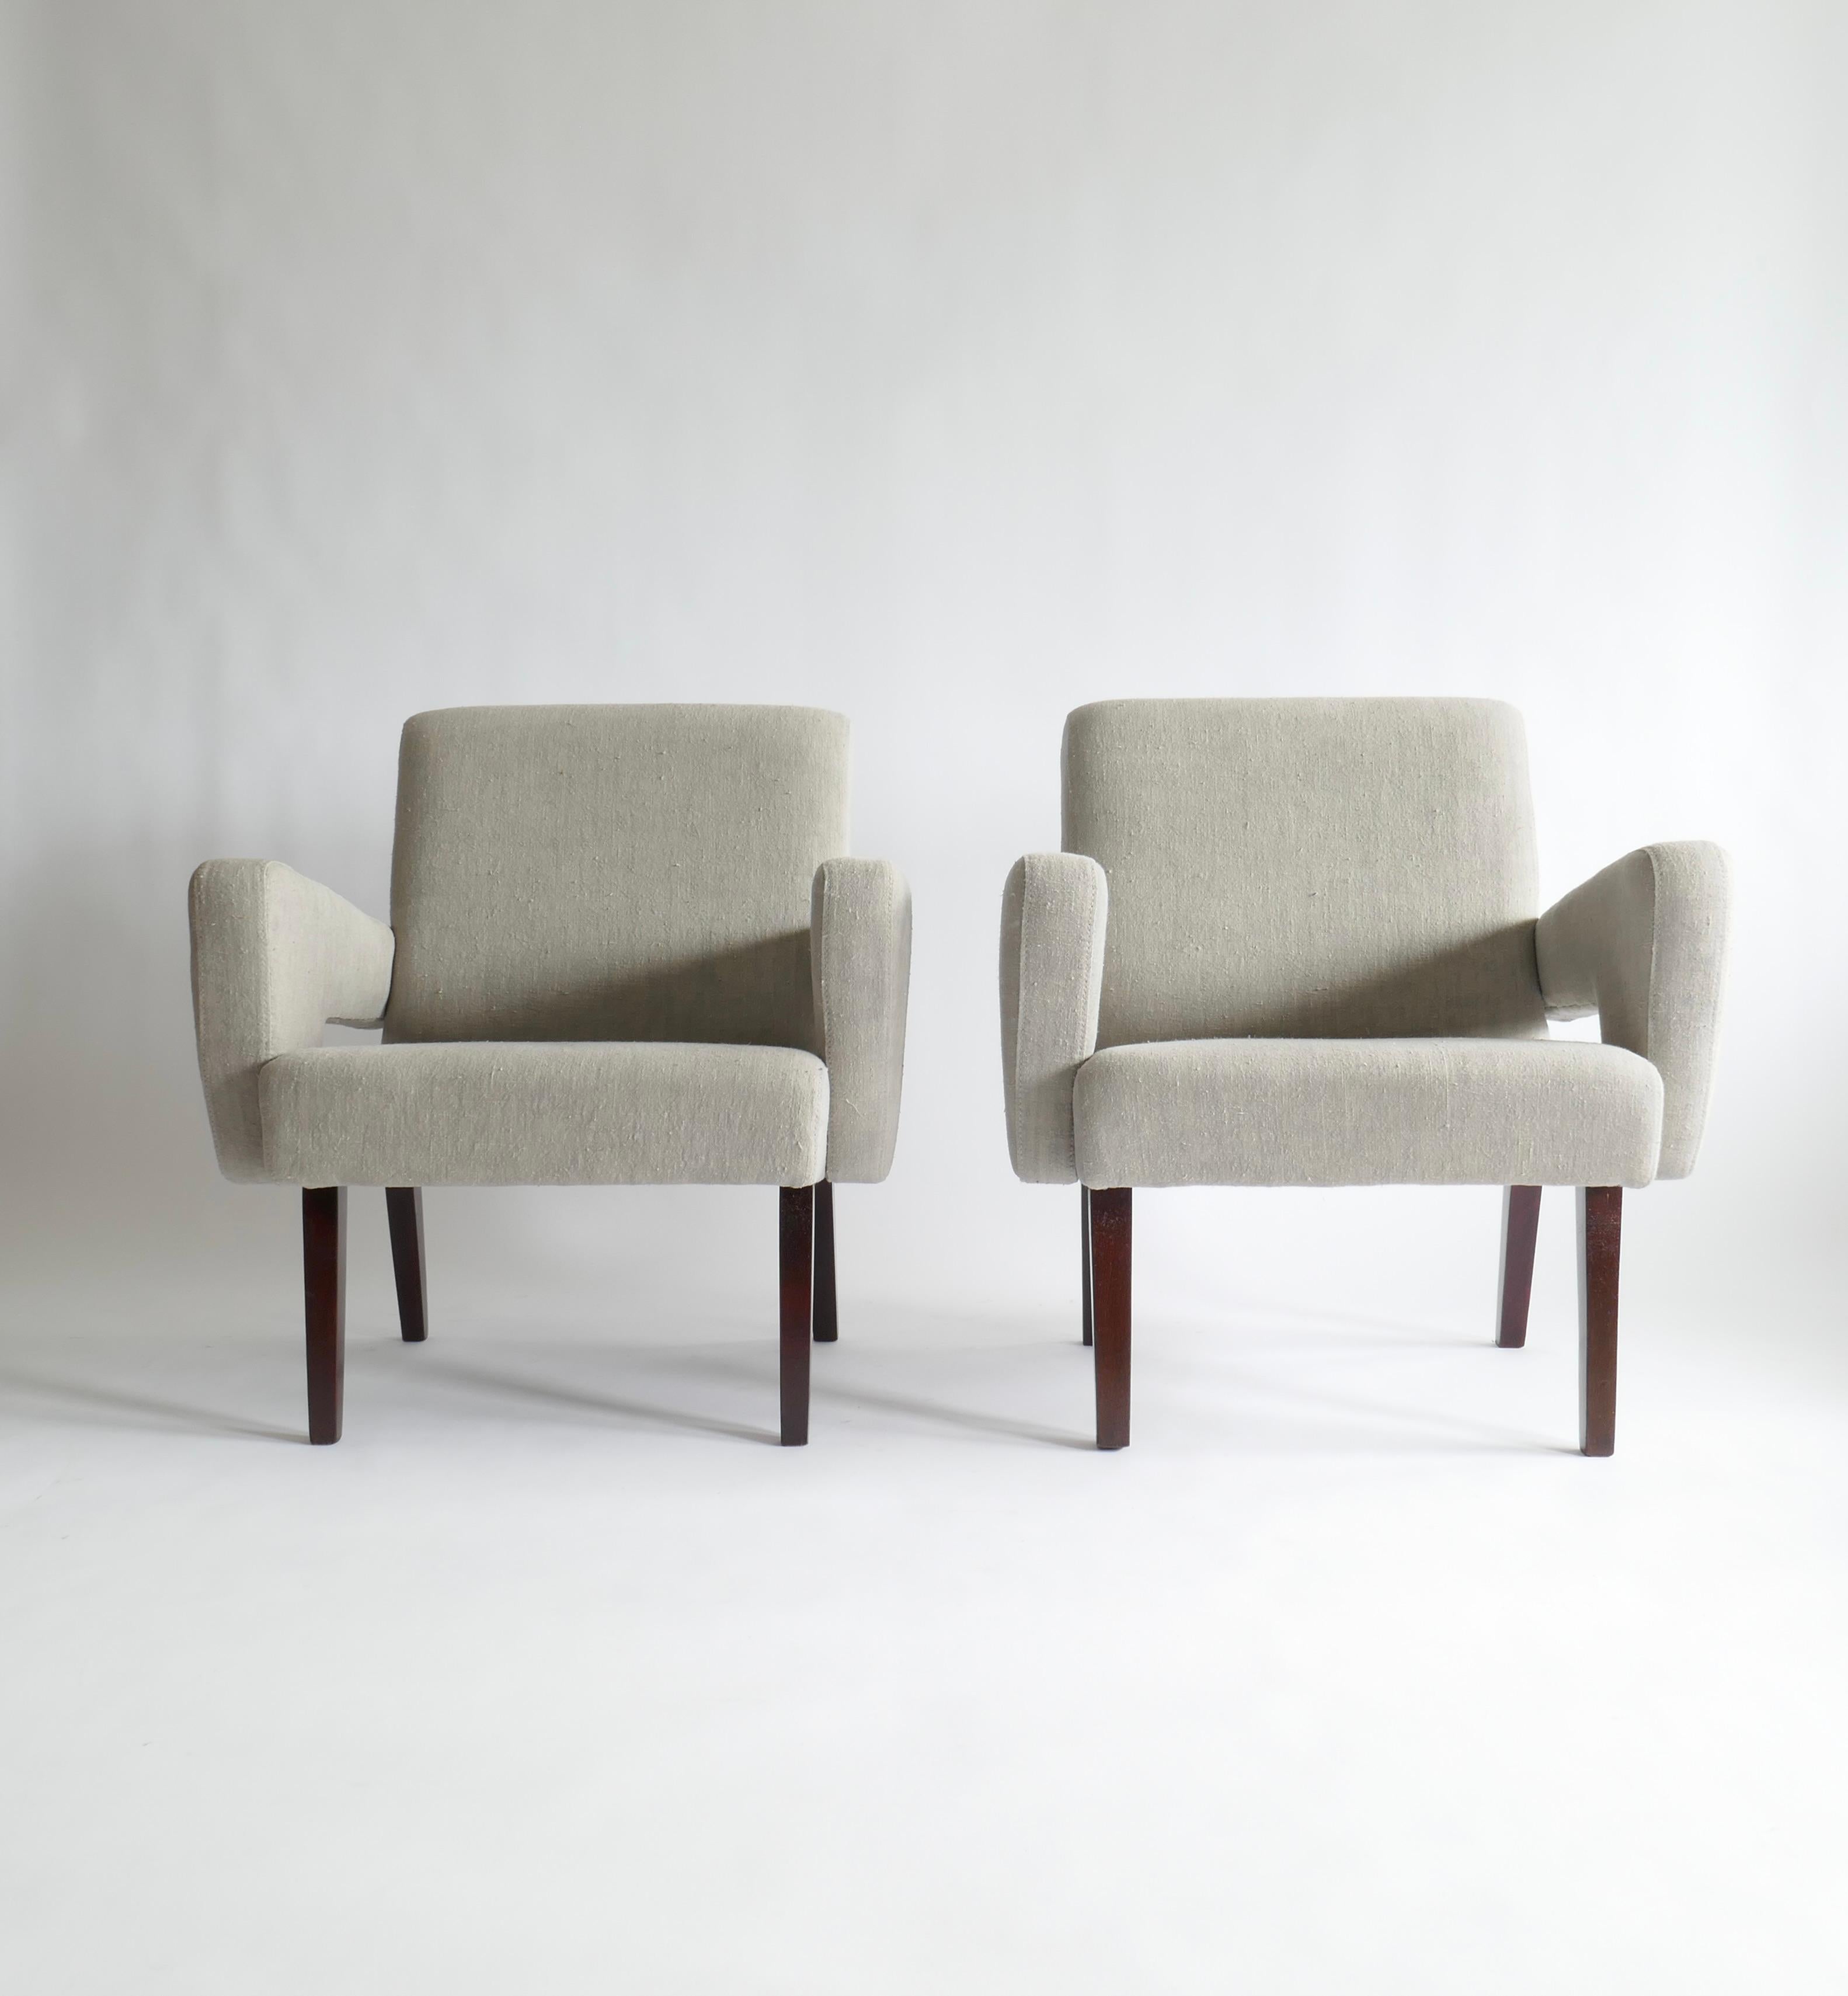 Mid-Century Modern Pair of Brutalist Armchairs Upholstered in Vintage French Light Grey Linen 1970s For Sale